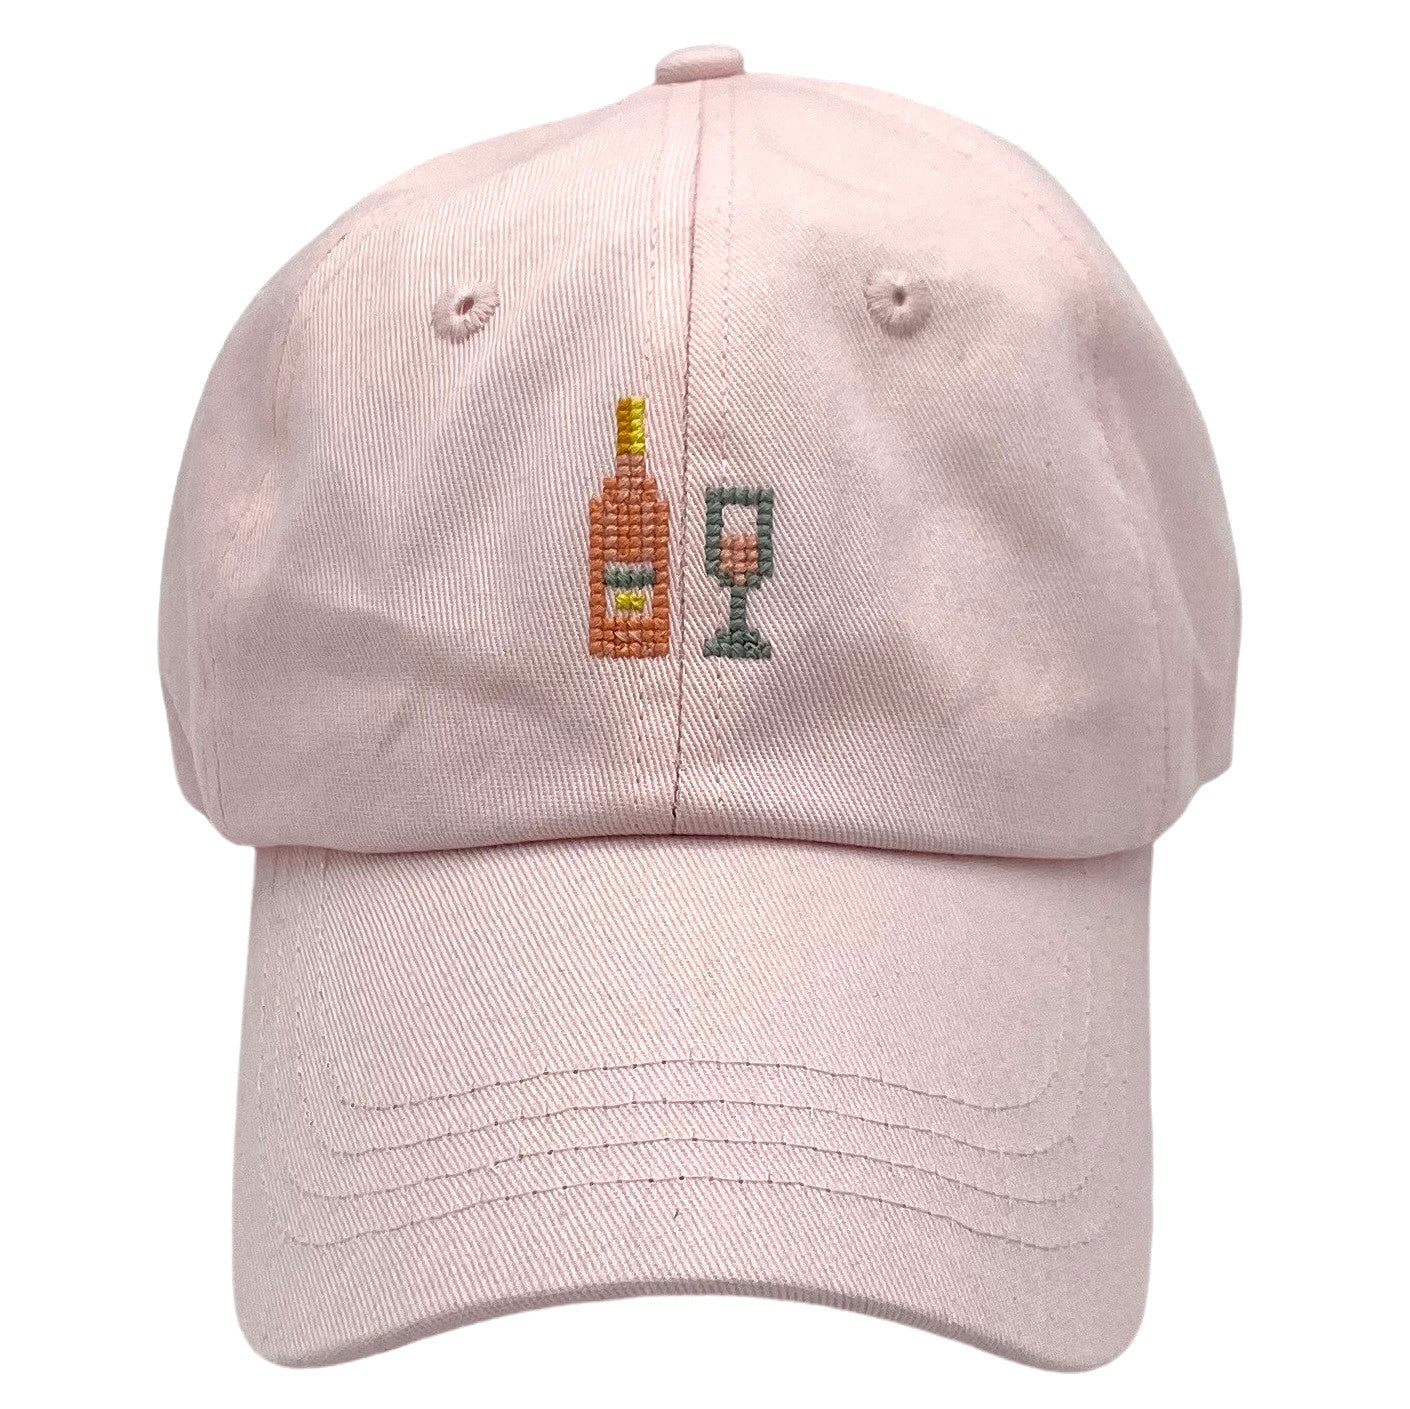 rosé all day on baby pink hat